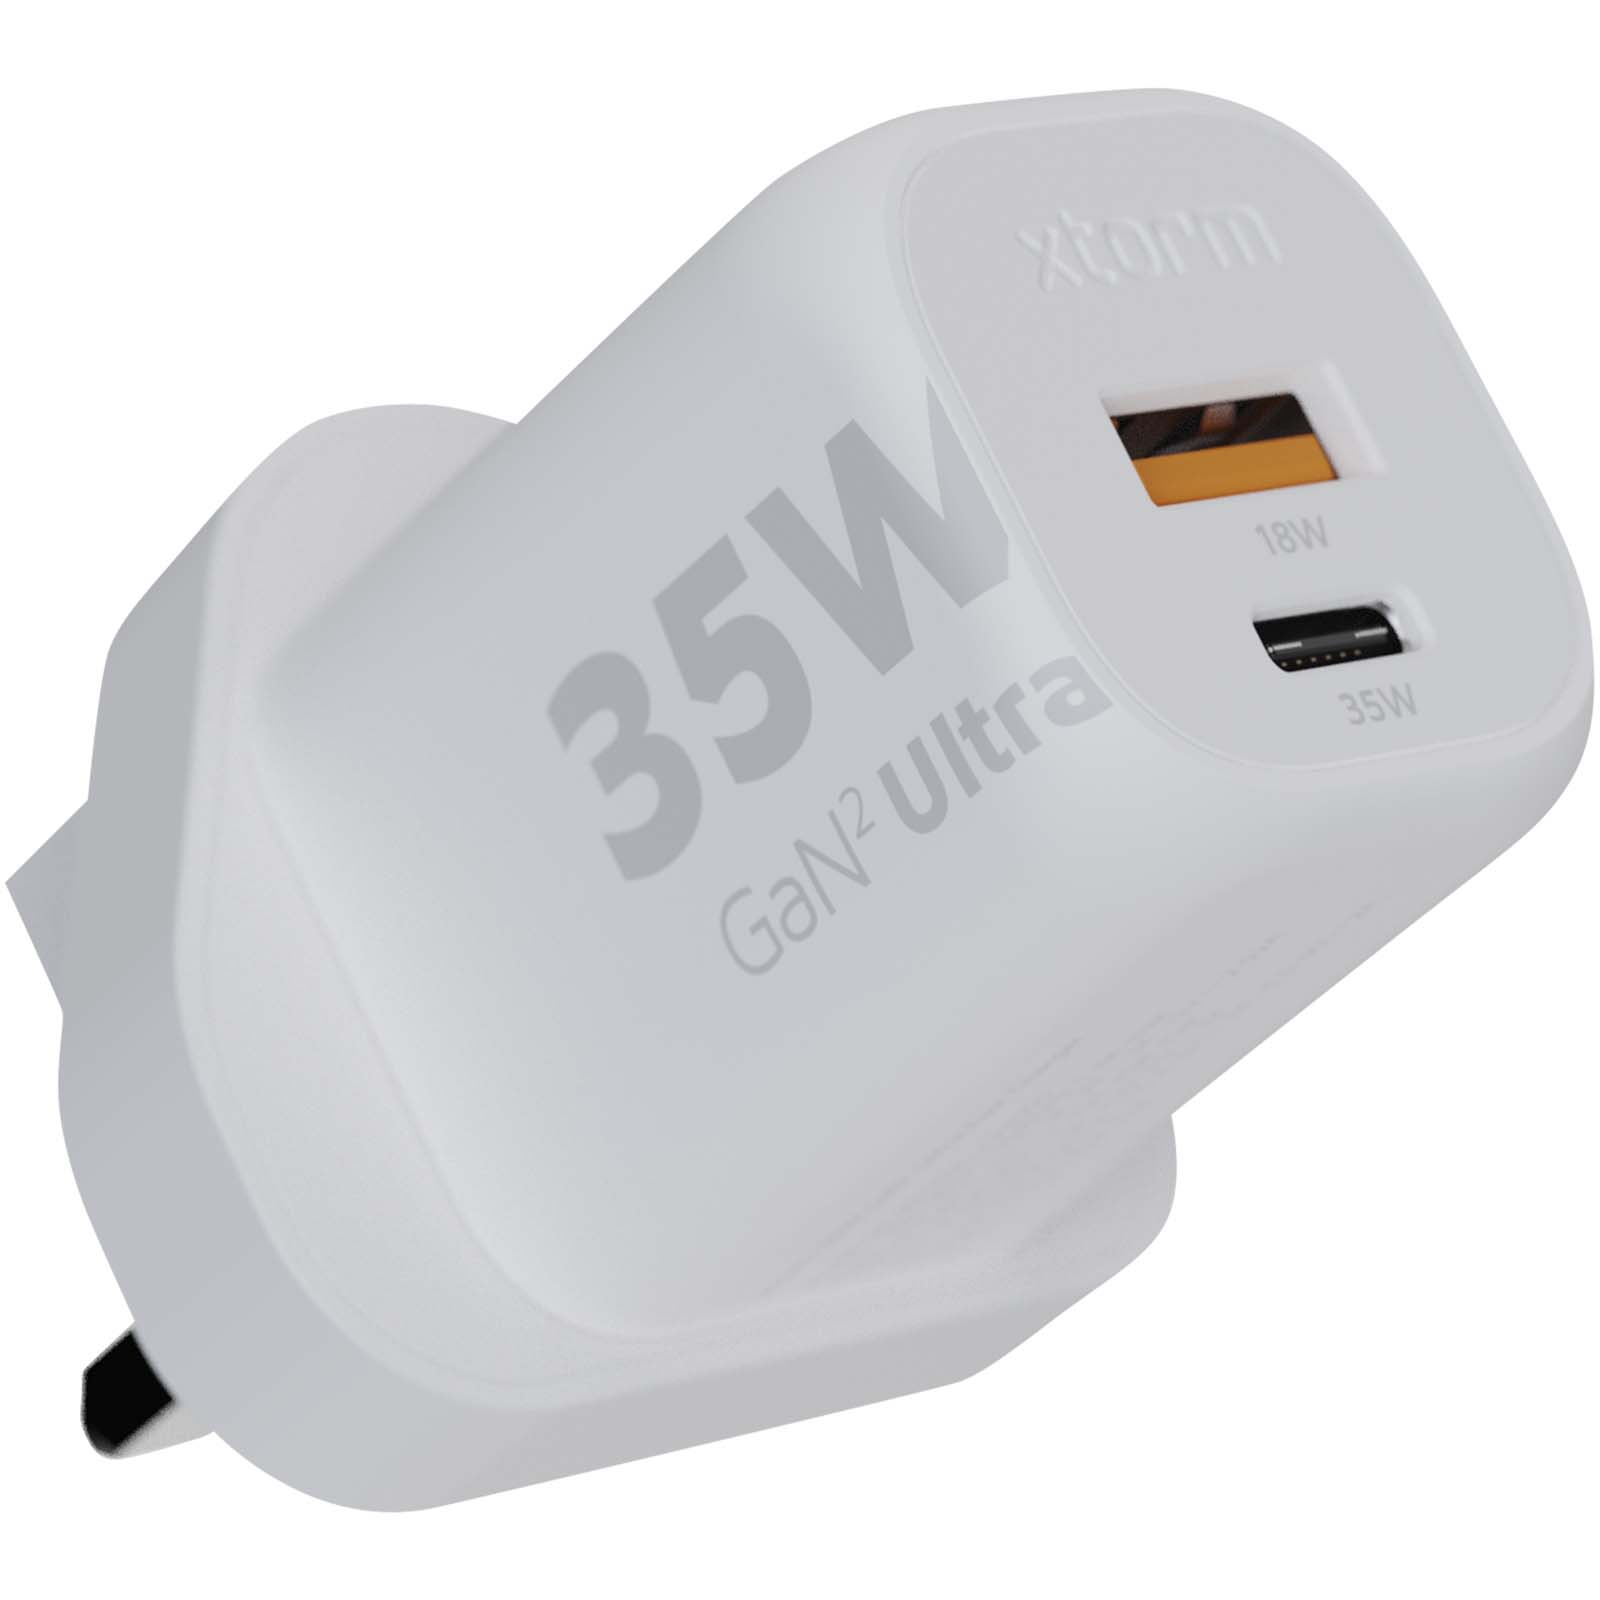 Advertising Chargers - Xtorm XEC035 GaN² Ultra 35W wall charger - UK plug